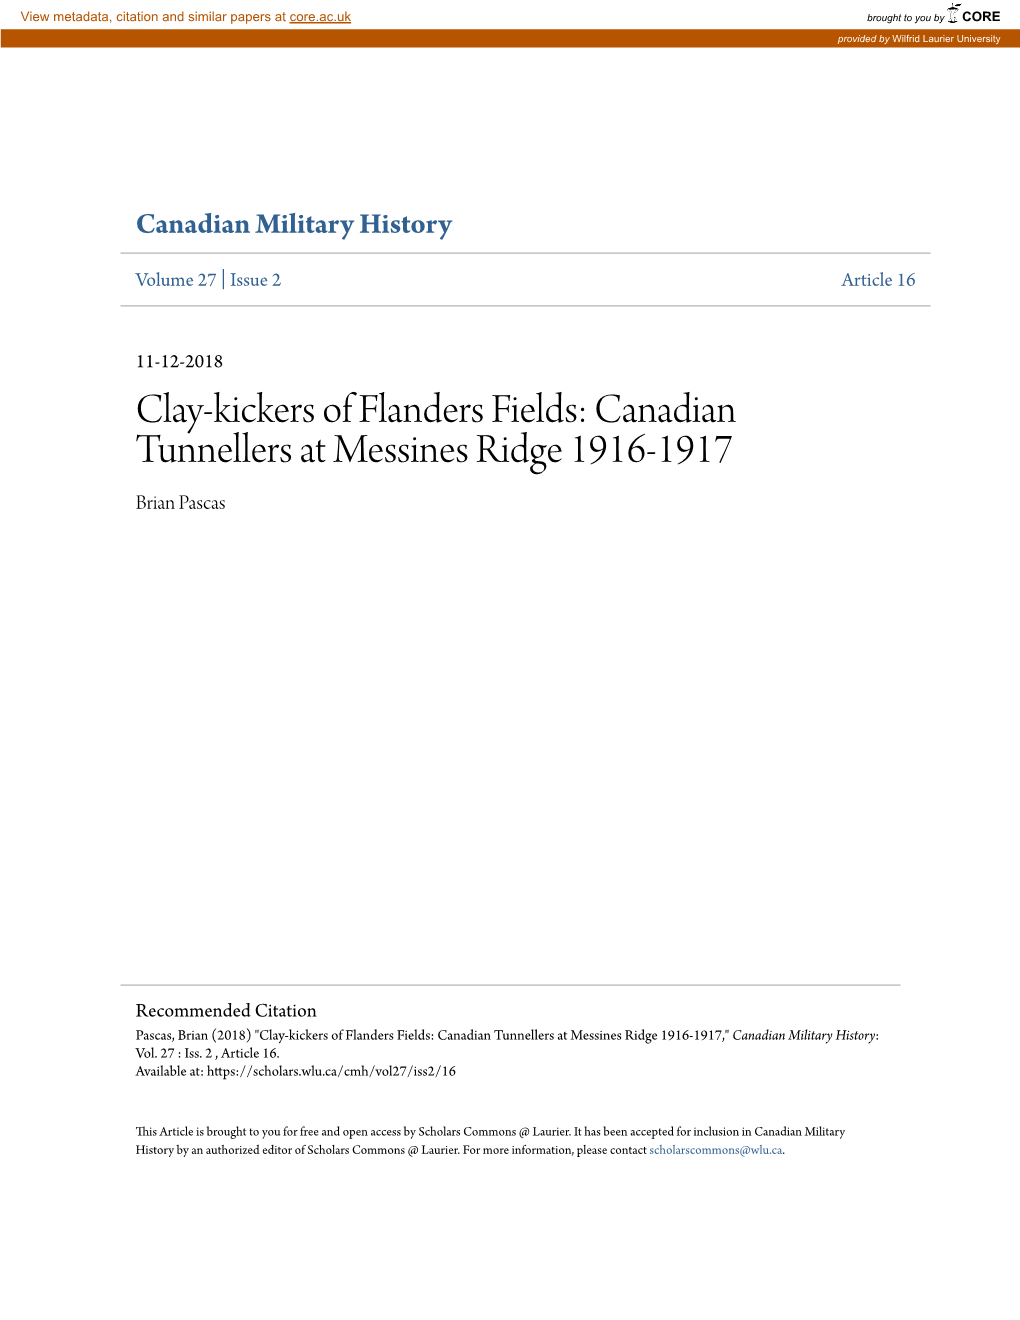 Clay-Kickers of Flanders Fields: Canadian Tunnellers at Messines Ridge 1916-1917 Brian Pascas